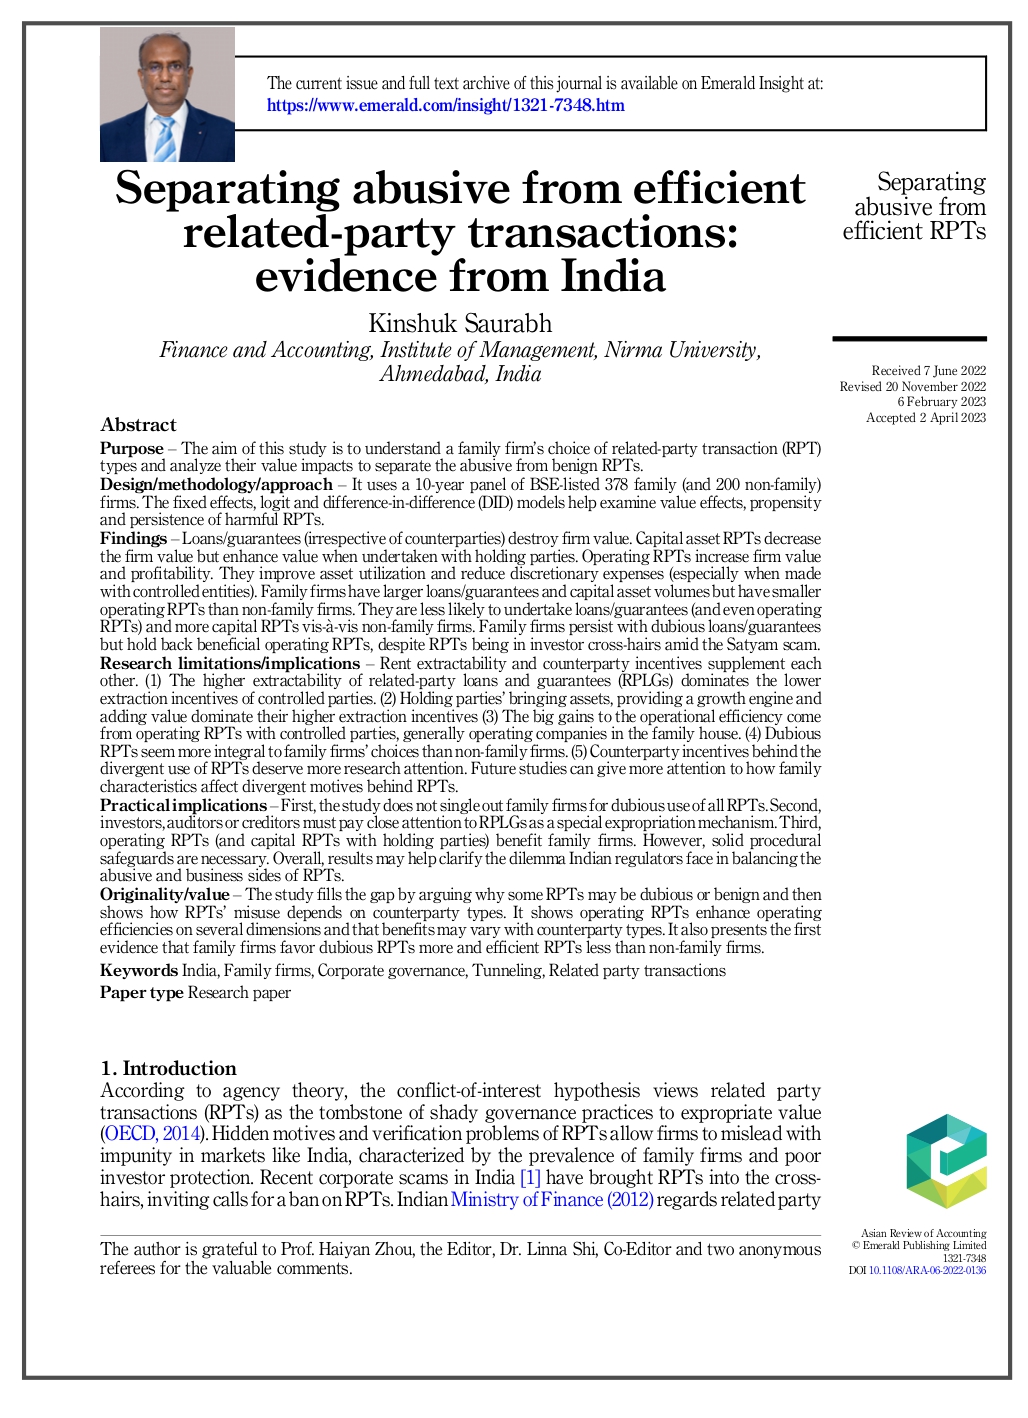 Separating Abusive from Efficient Related-Party Transactions: Evidence from India